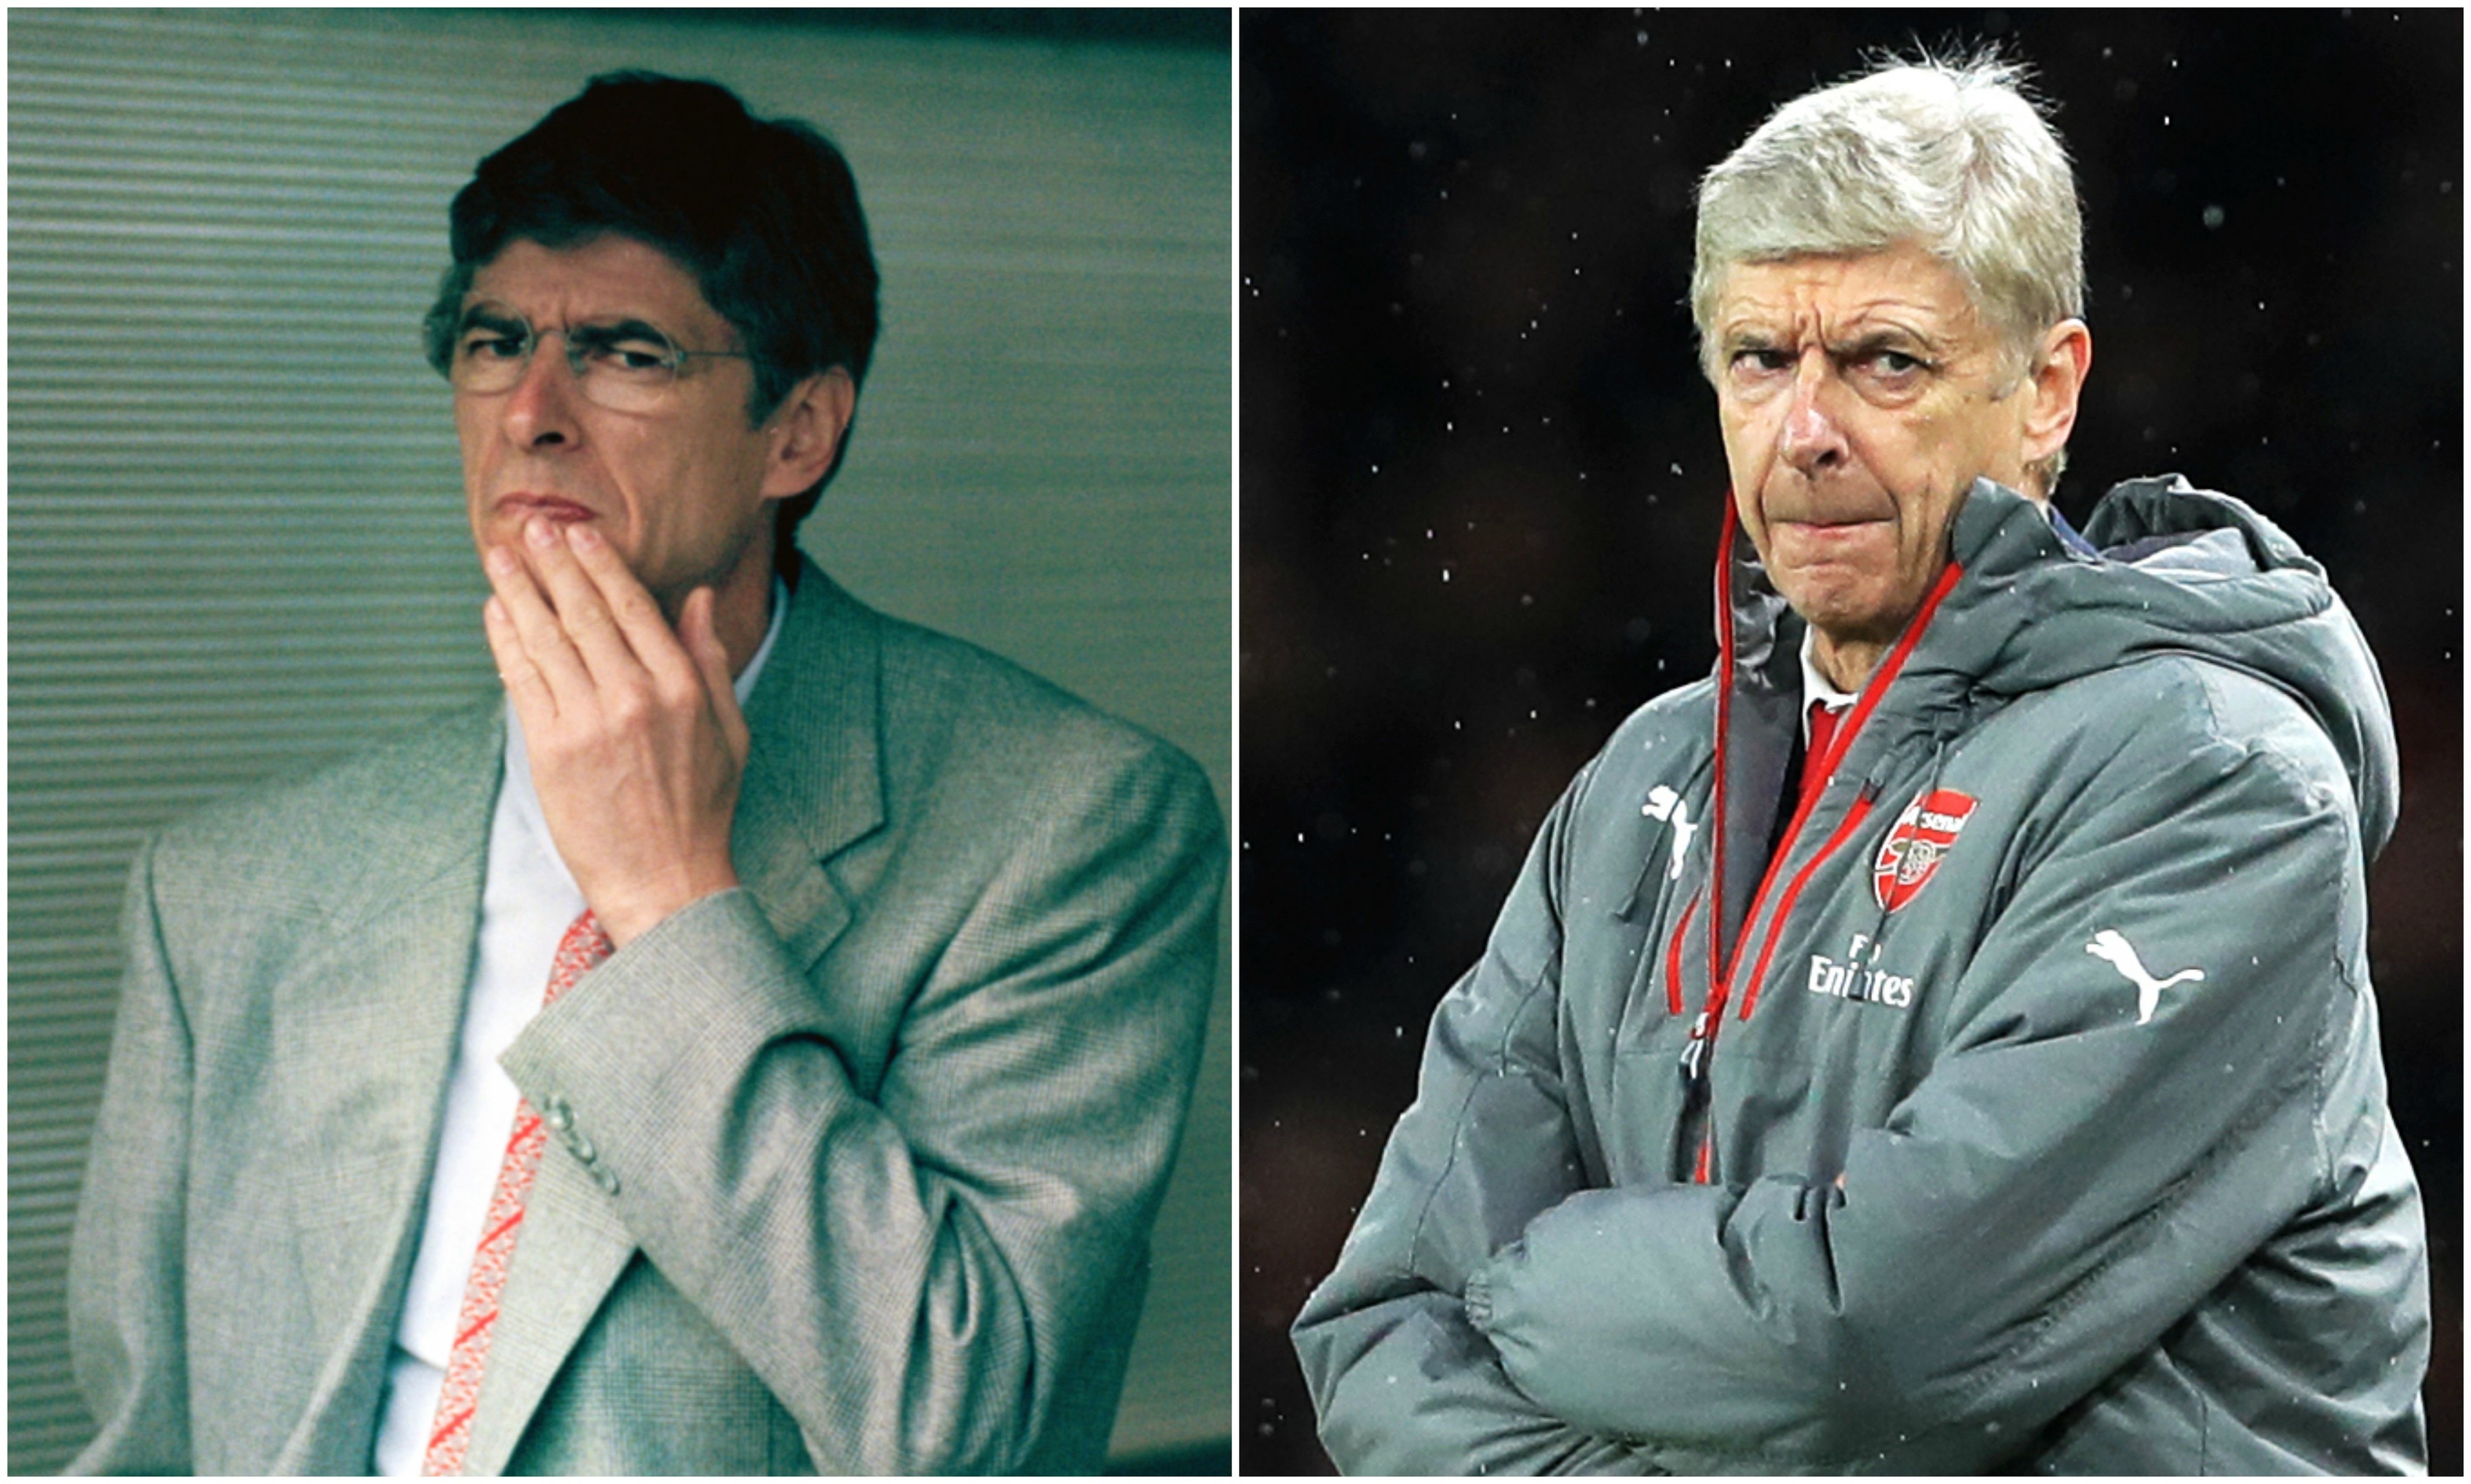 Wenger pictured in 1996 (left) and 2018